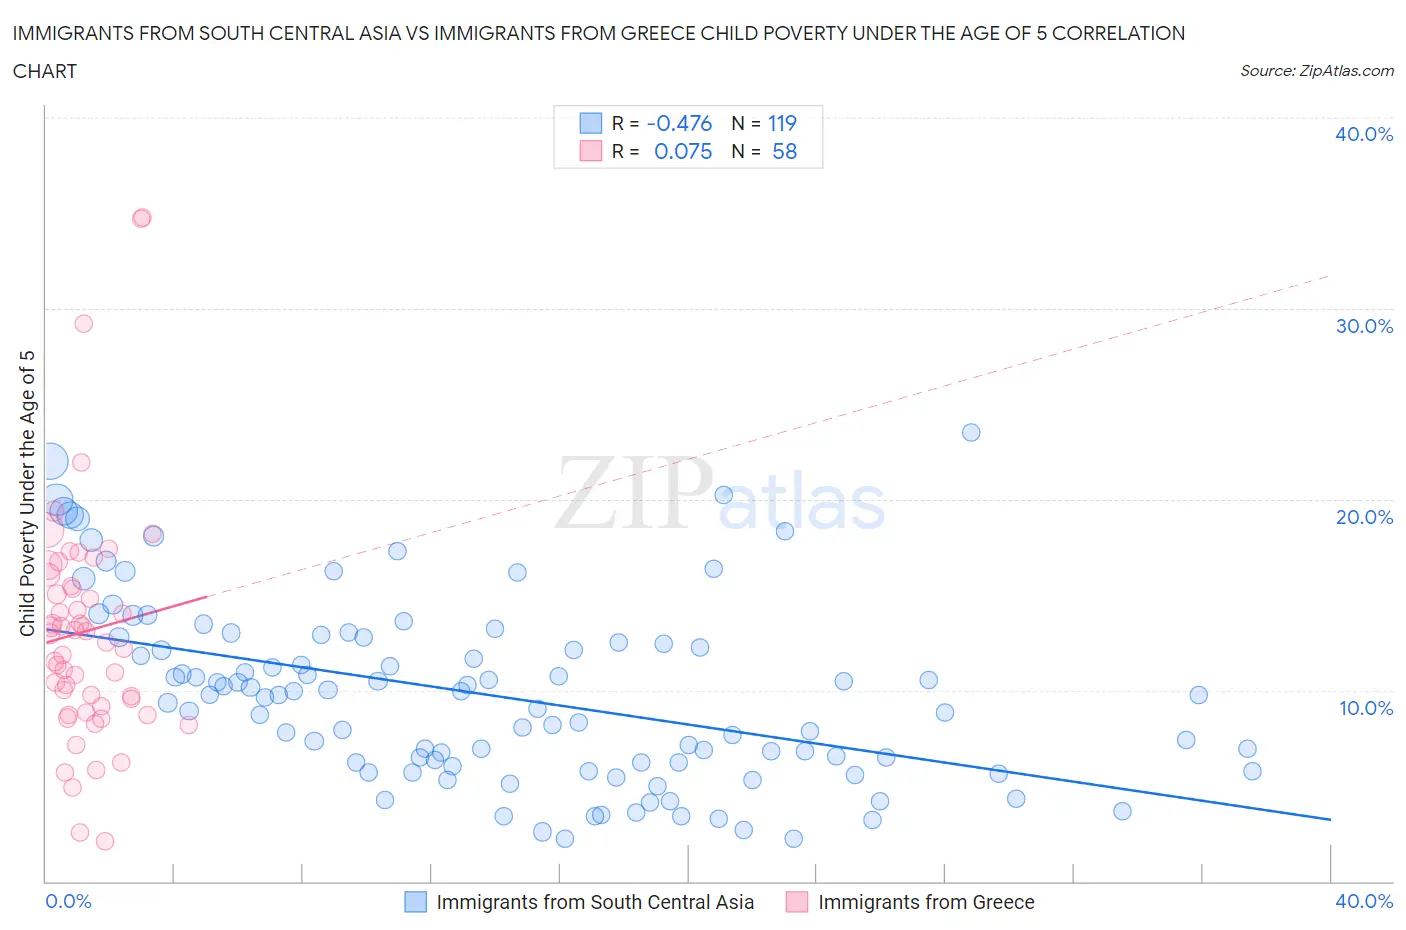 Immigrants from South Central Asia vs Immigrants from Greece Child Poverty Under the Age of 5